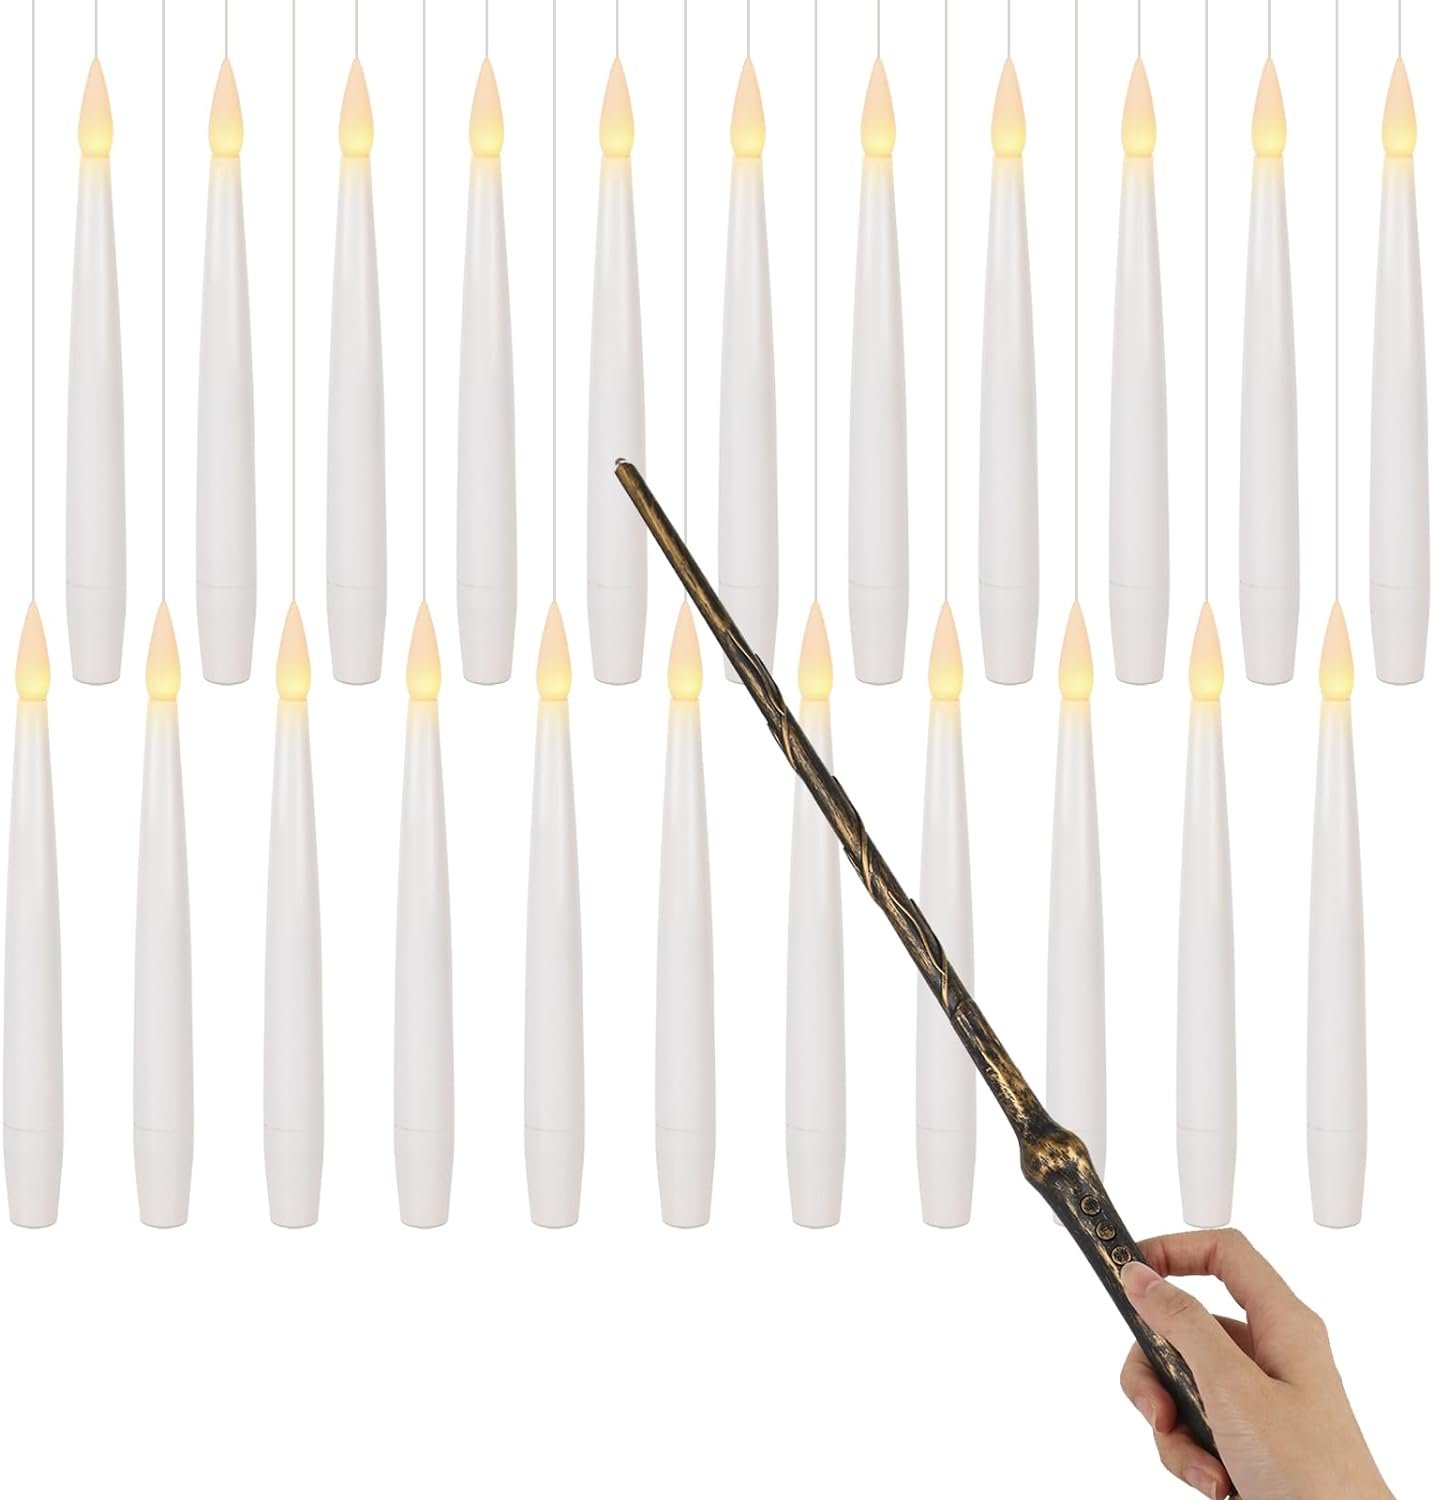 Flameless Taper Floating Candle with Magic Wand Remote - 22 Pcs, 6.1"